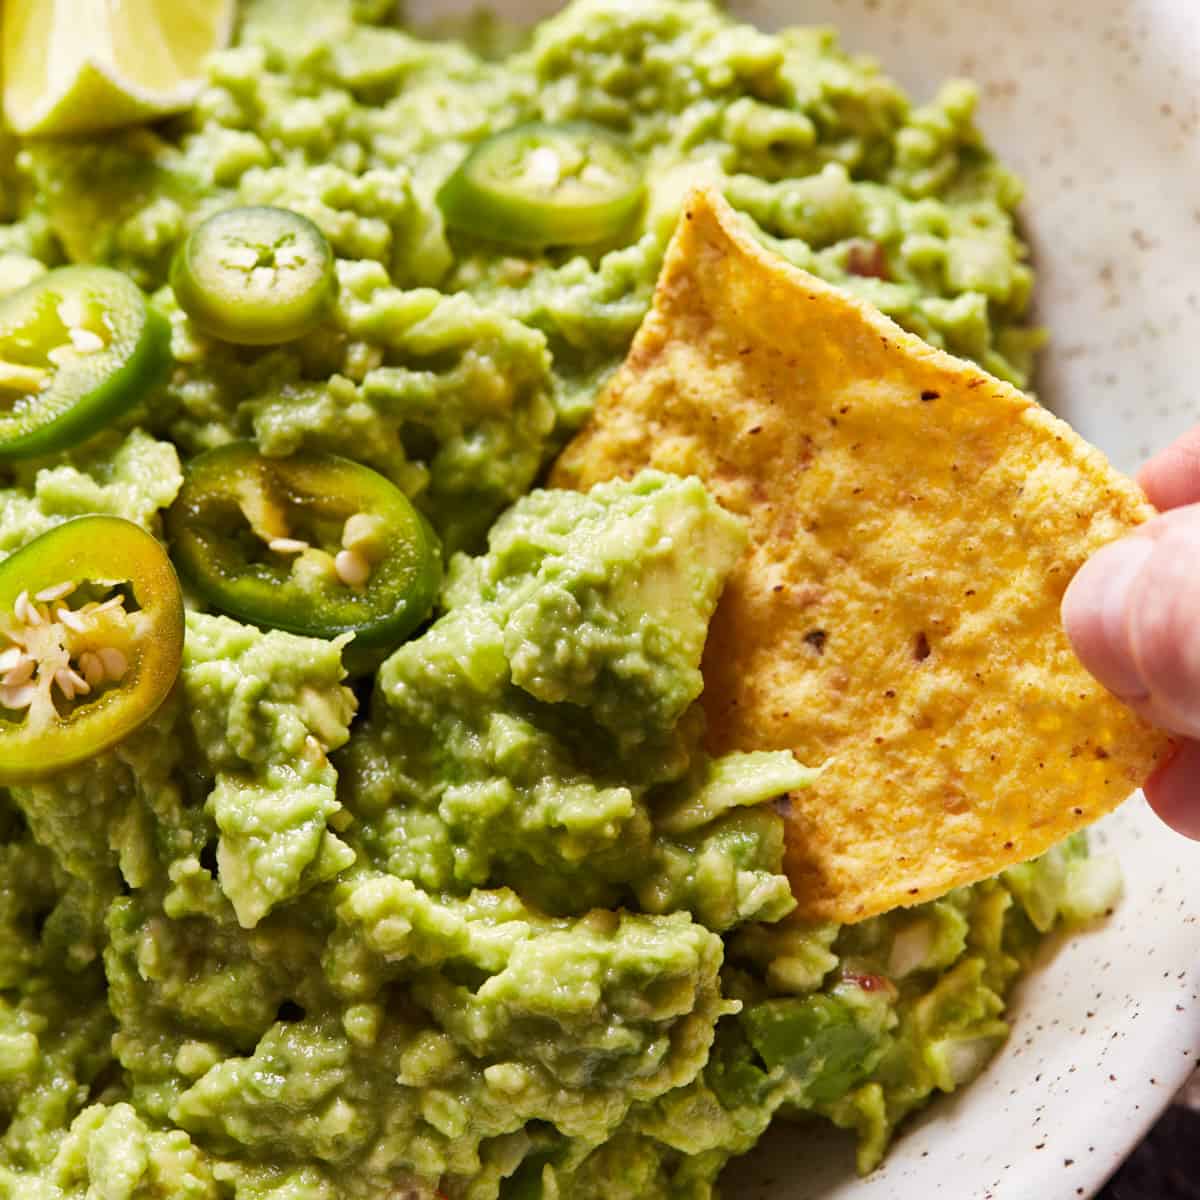 Scooping some guacamole with a tortilla chip